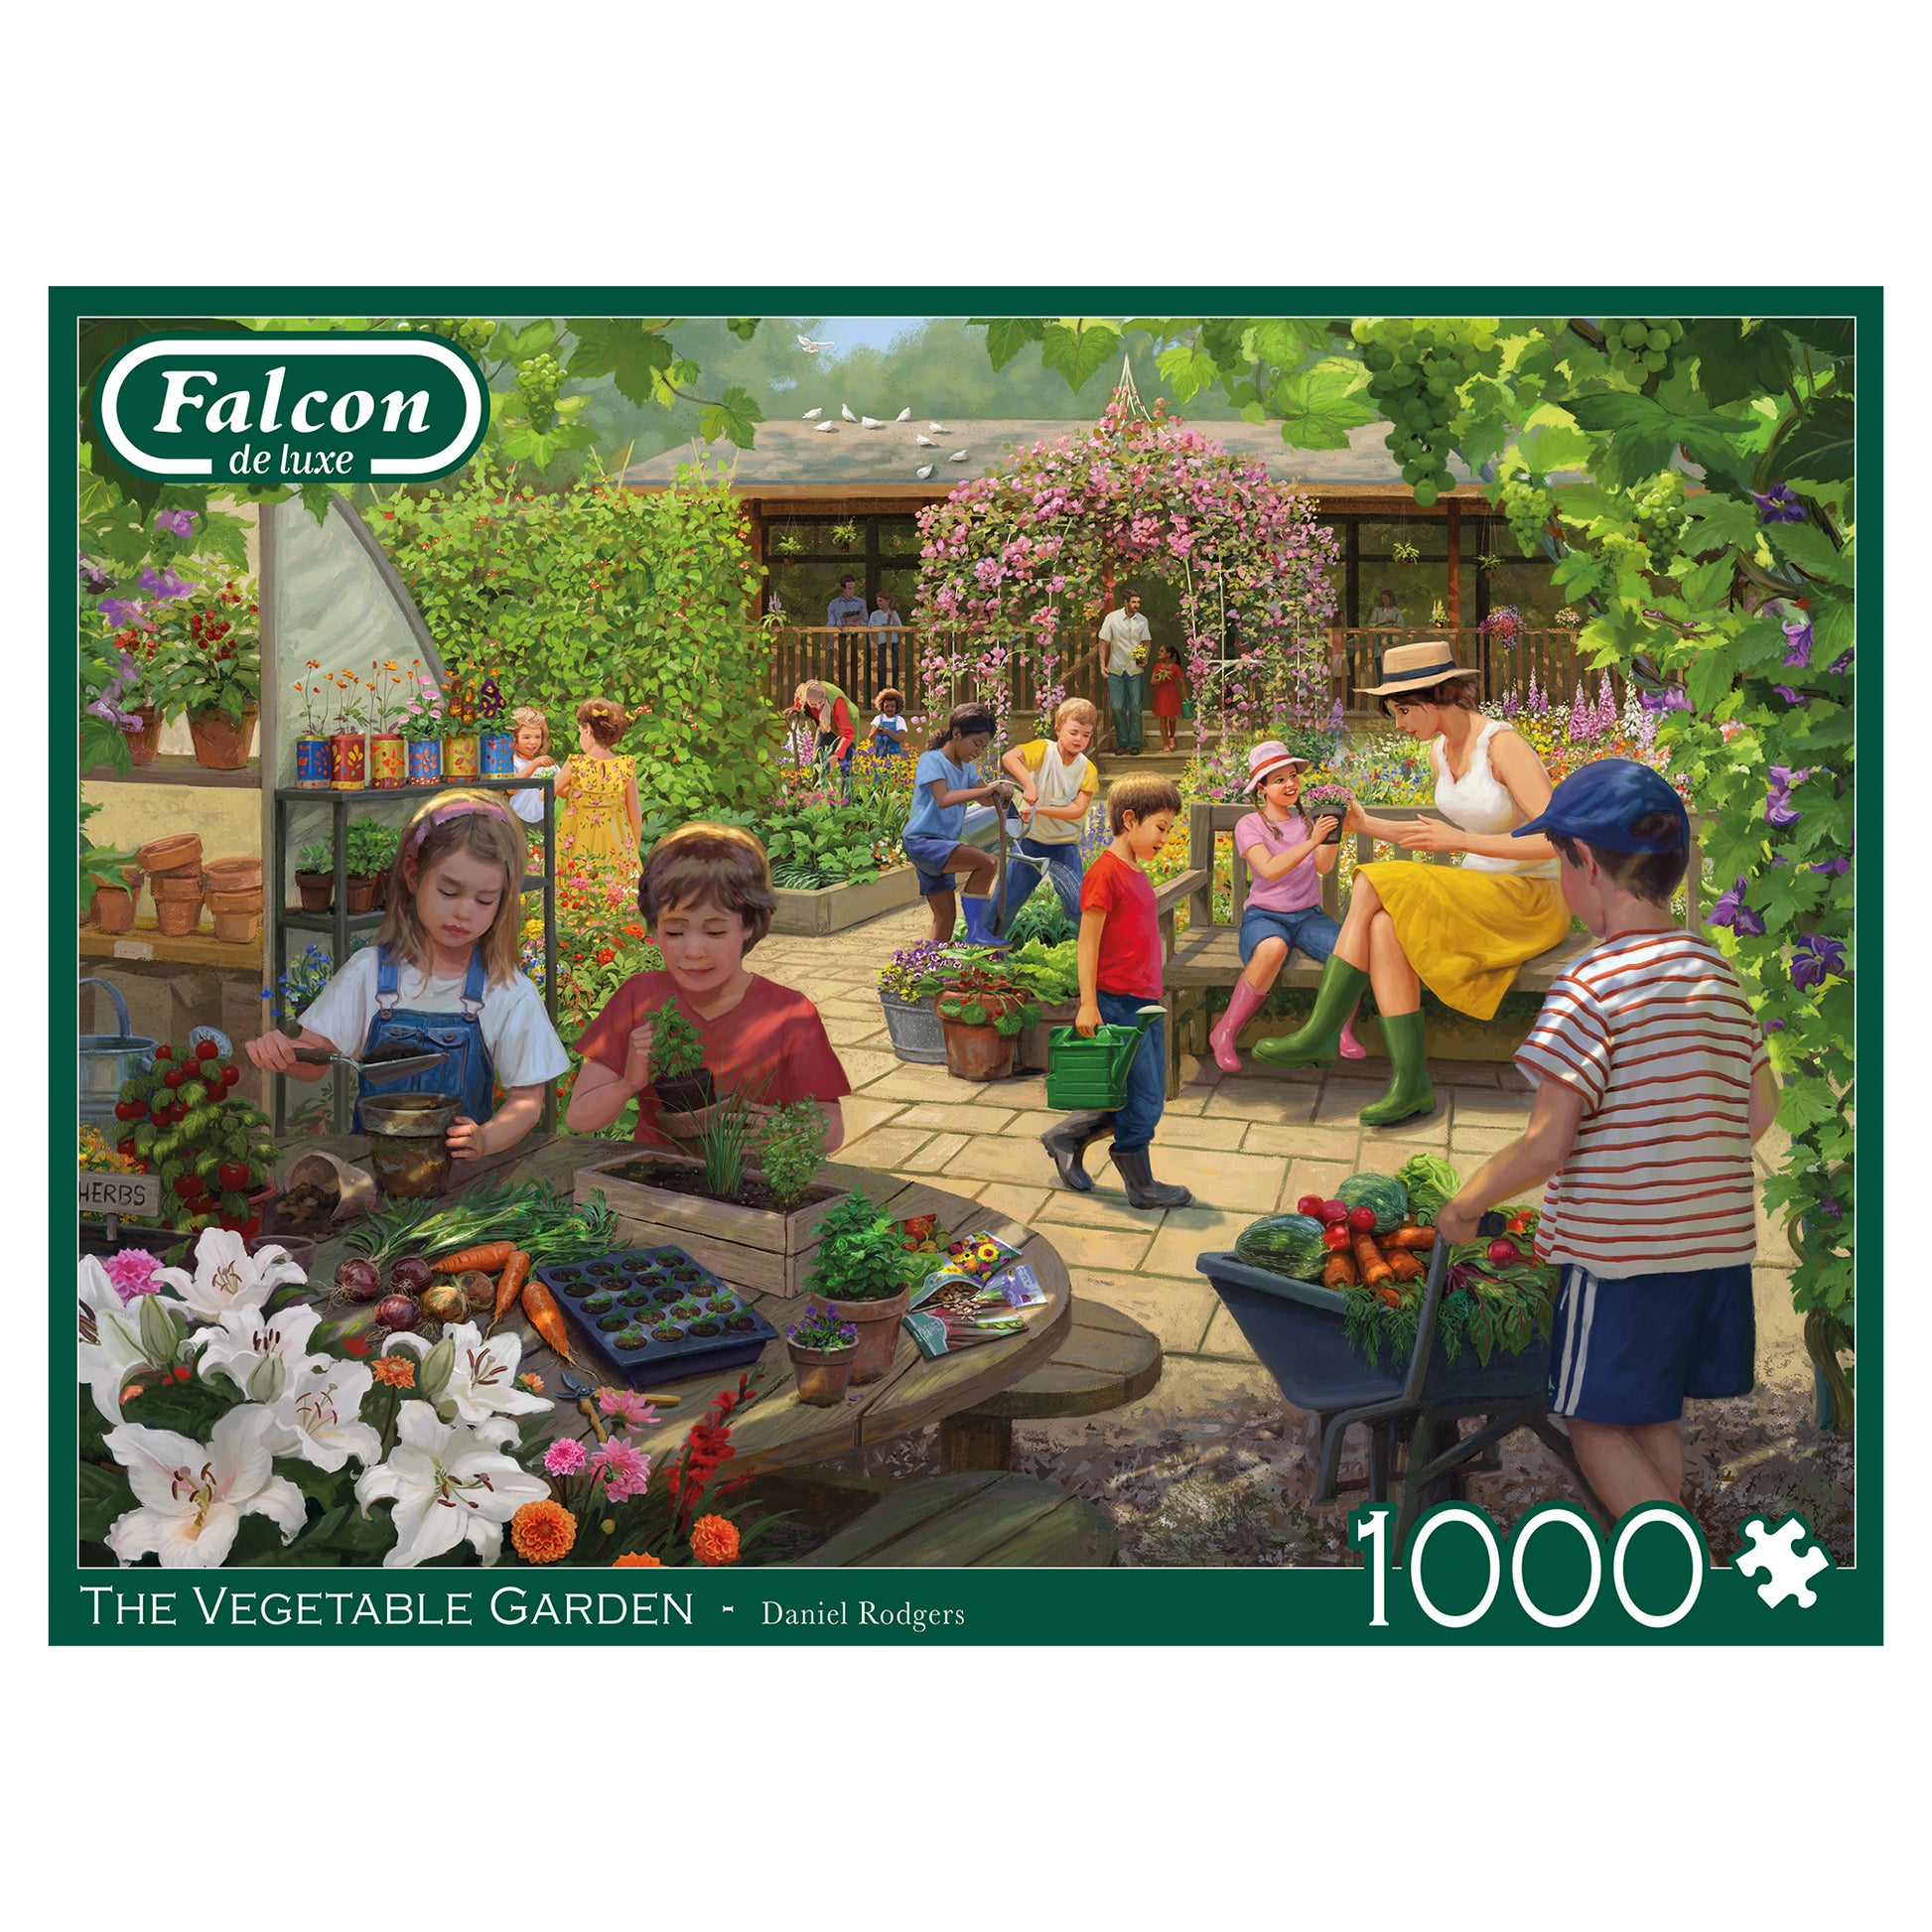 Falcon - The Vegetable Garden (1000 pieces) - product image - Jumboplay.com